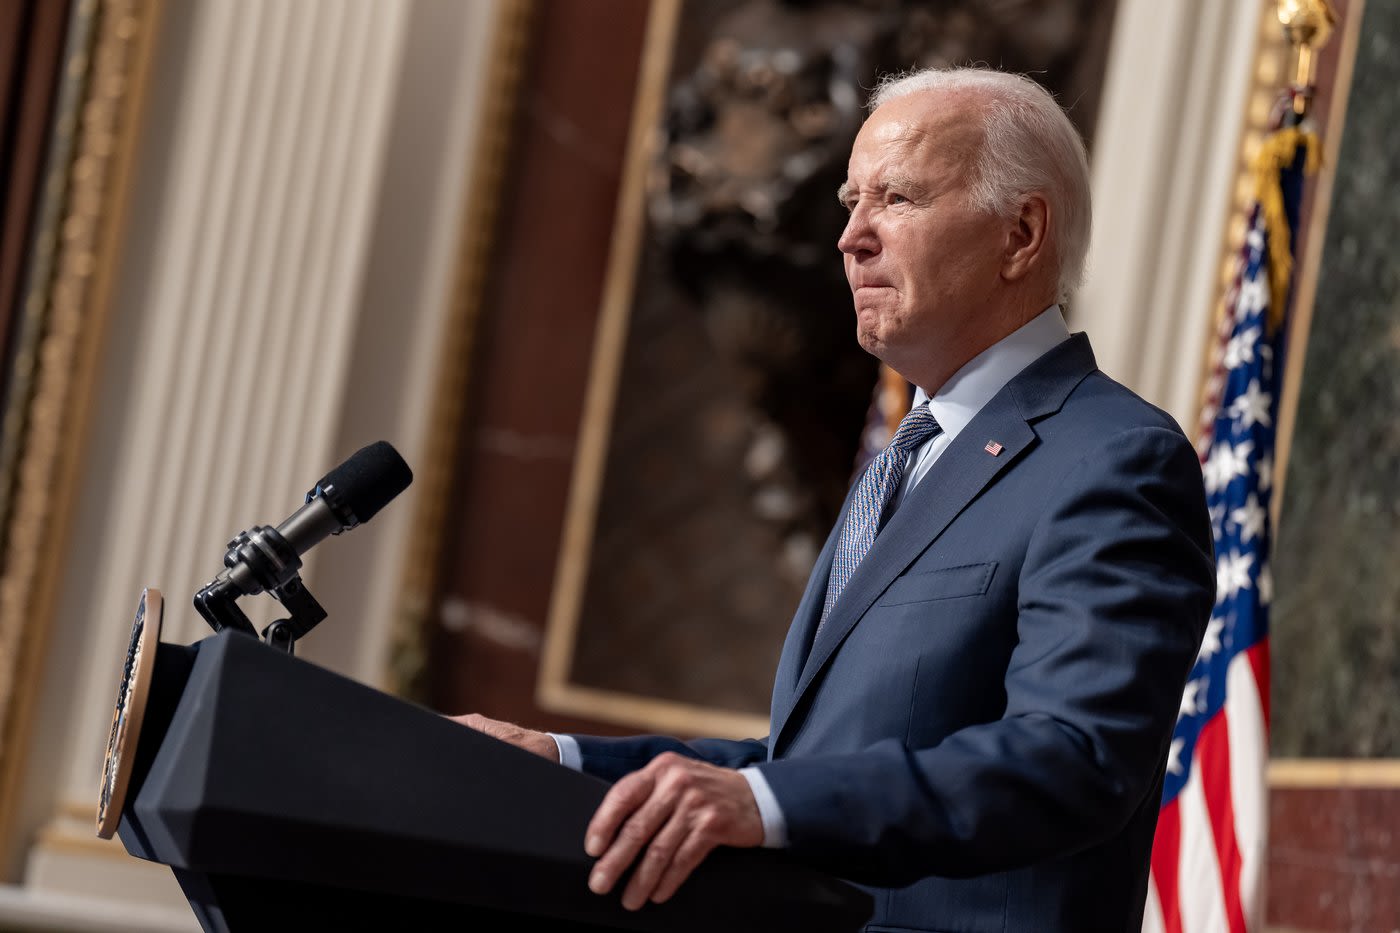 Are Stocks Going to Crash if Joe Biden Wins and Democrats Control Congress? Here's What History Says About Stock...